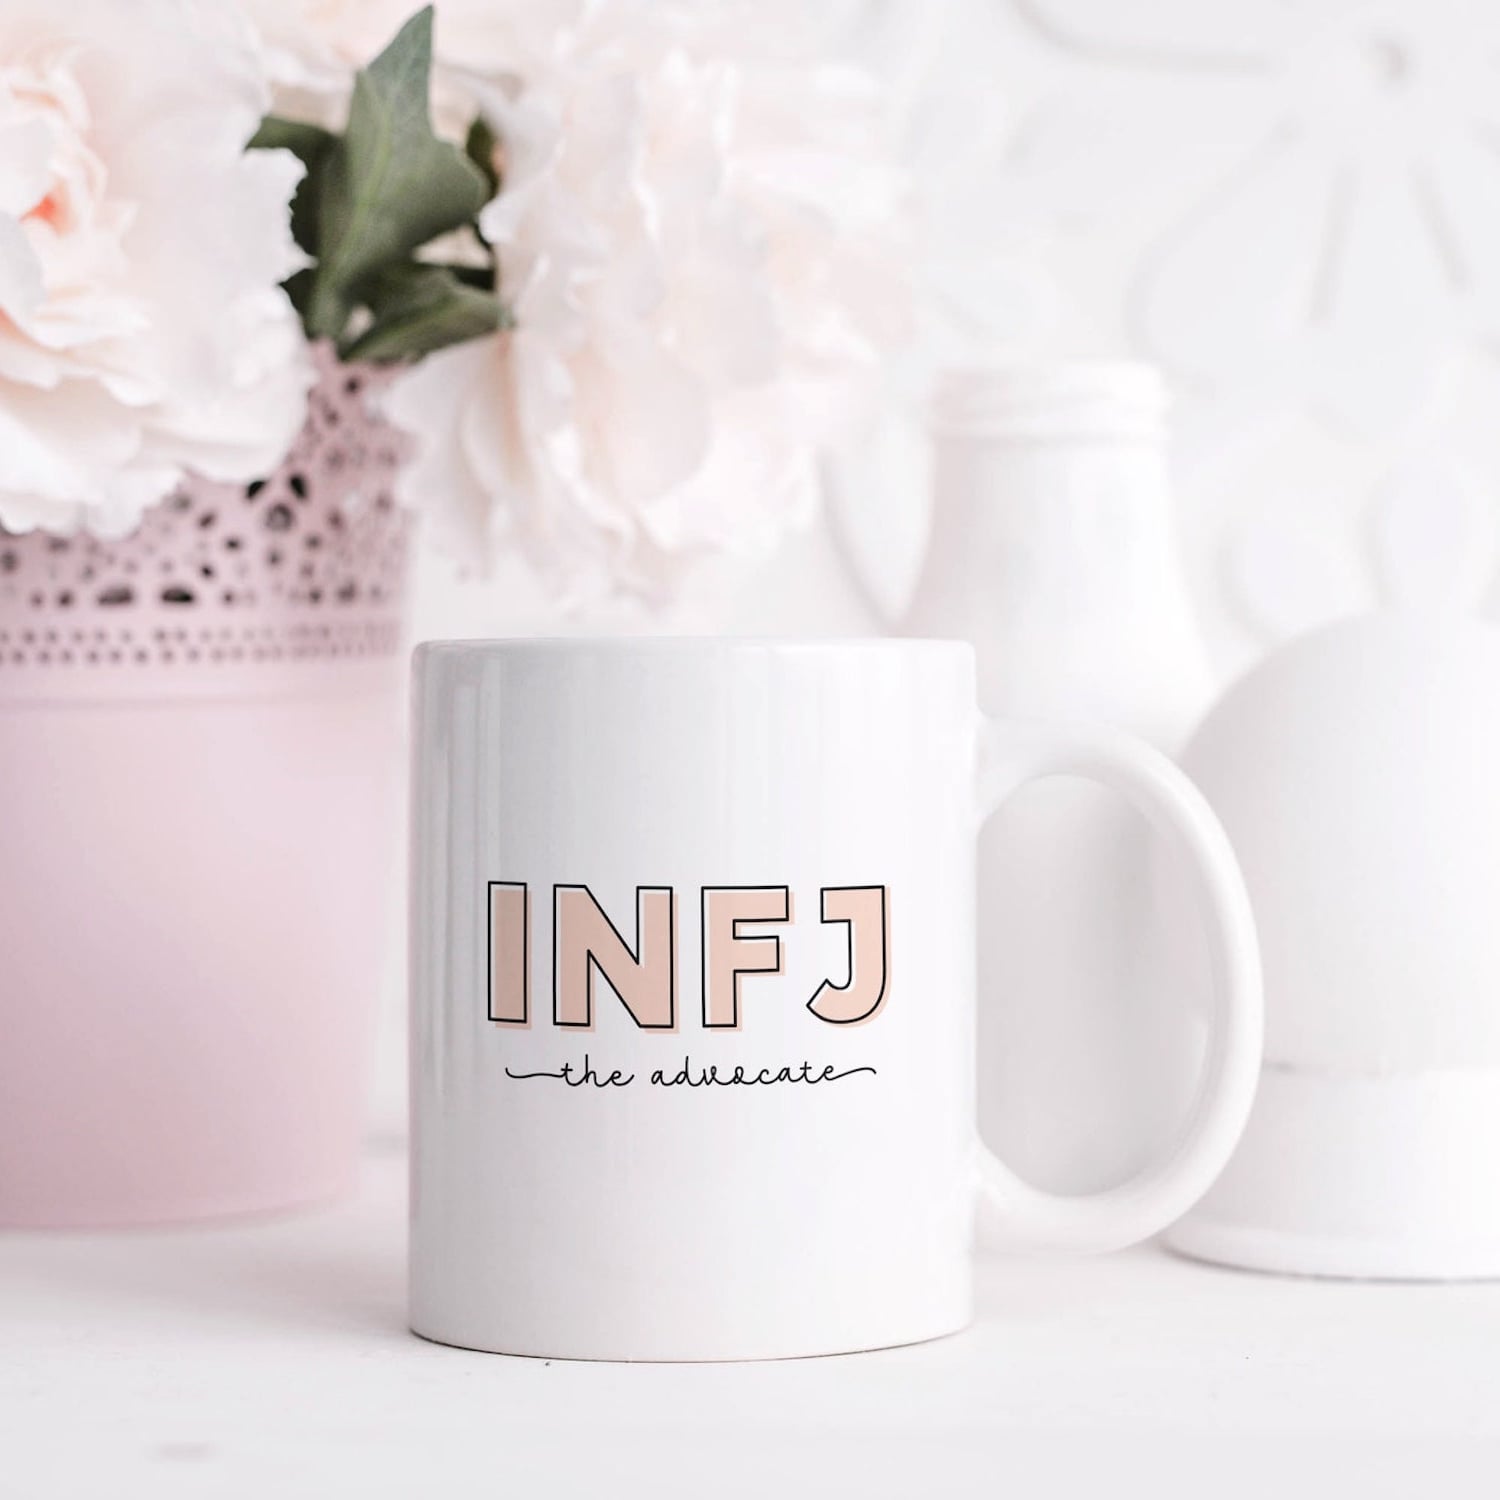 Are infj good in bed?